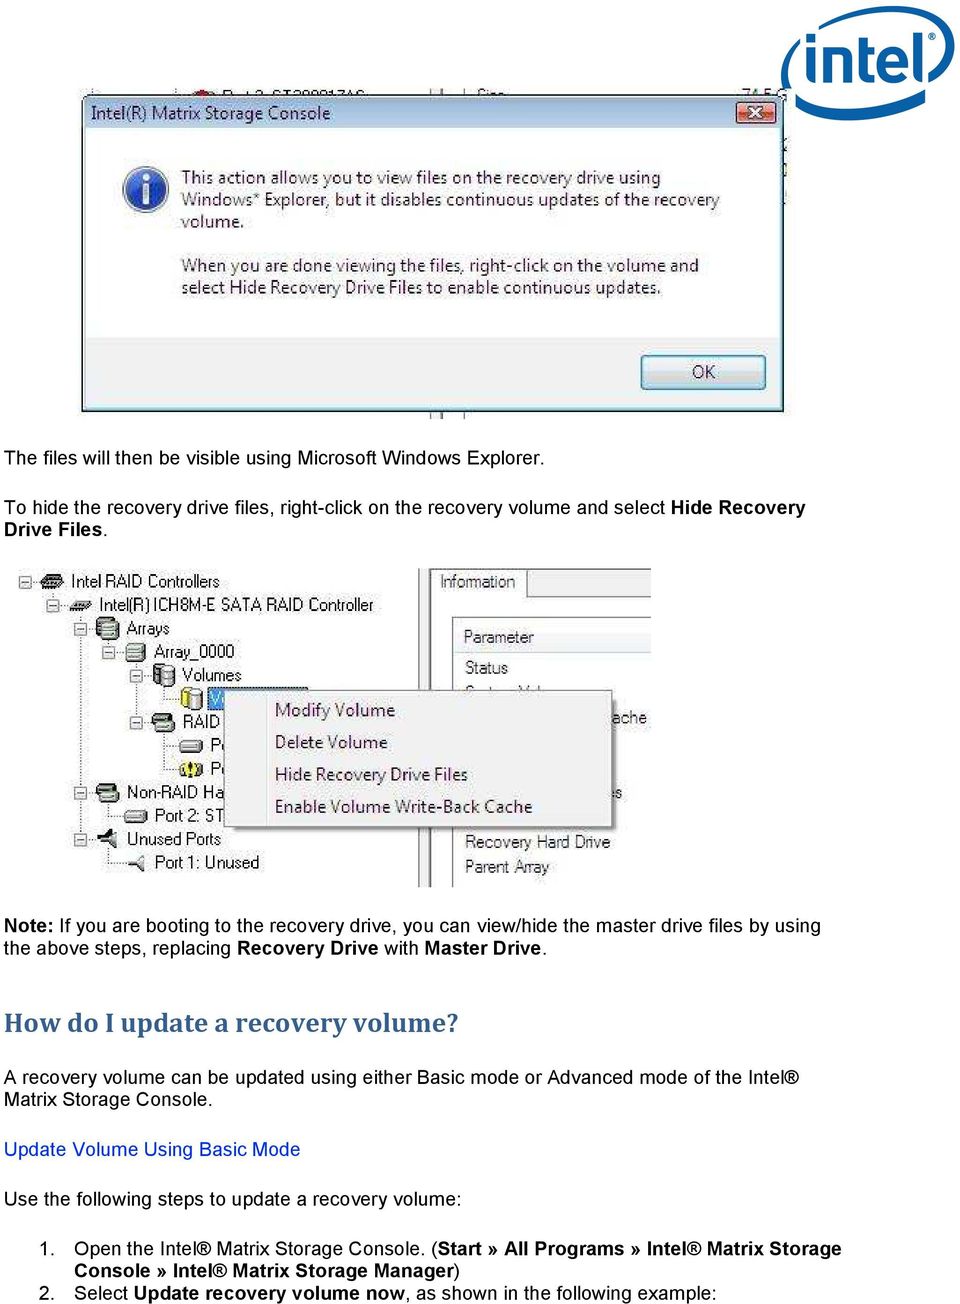 How do I update a recovery volume? A recovery volume can be updated using either Basic mode or Advanced mode of the Intel Matrix Storage Console.